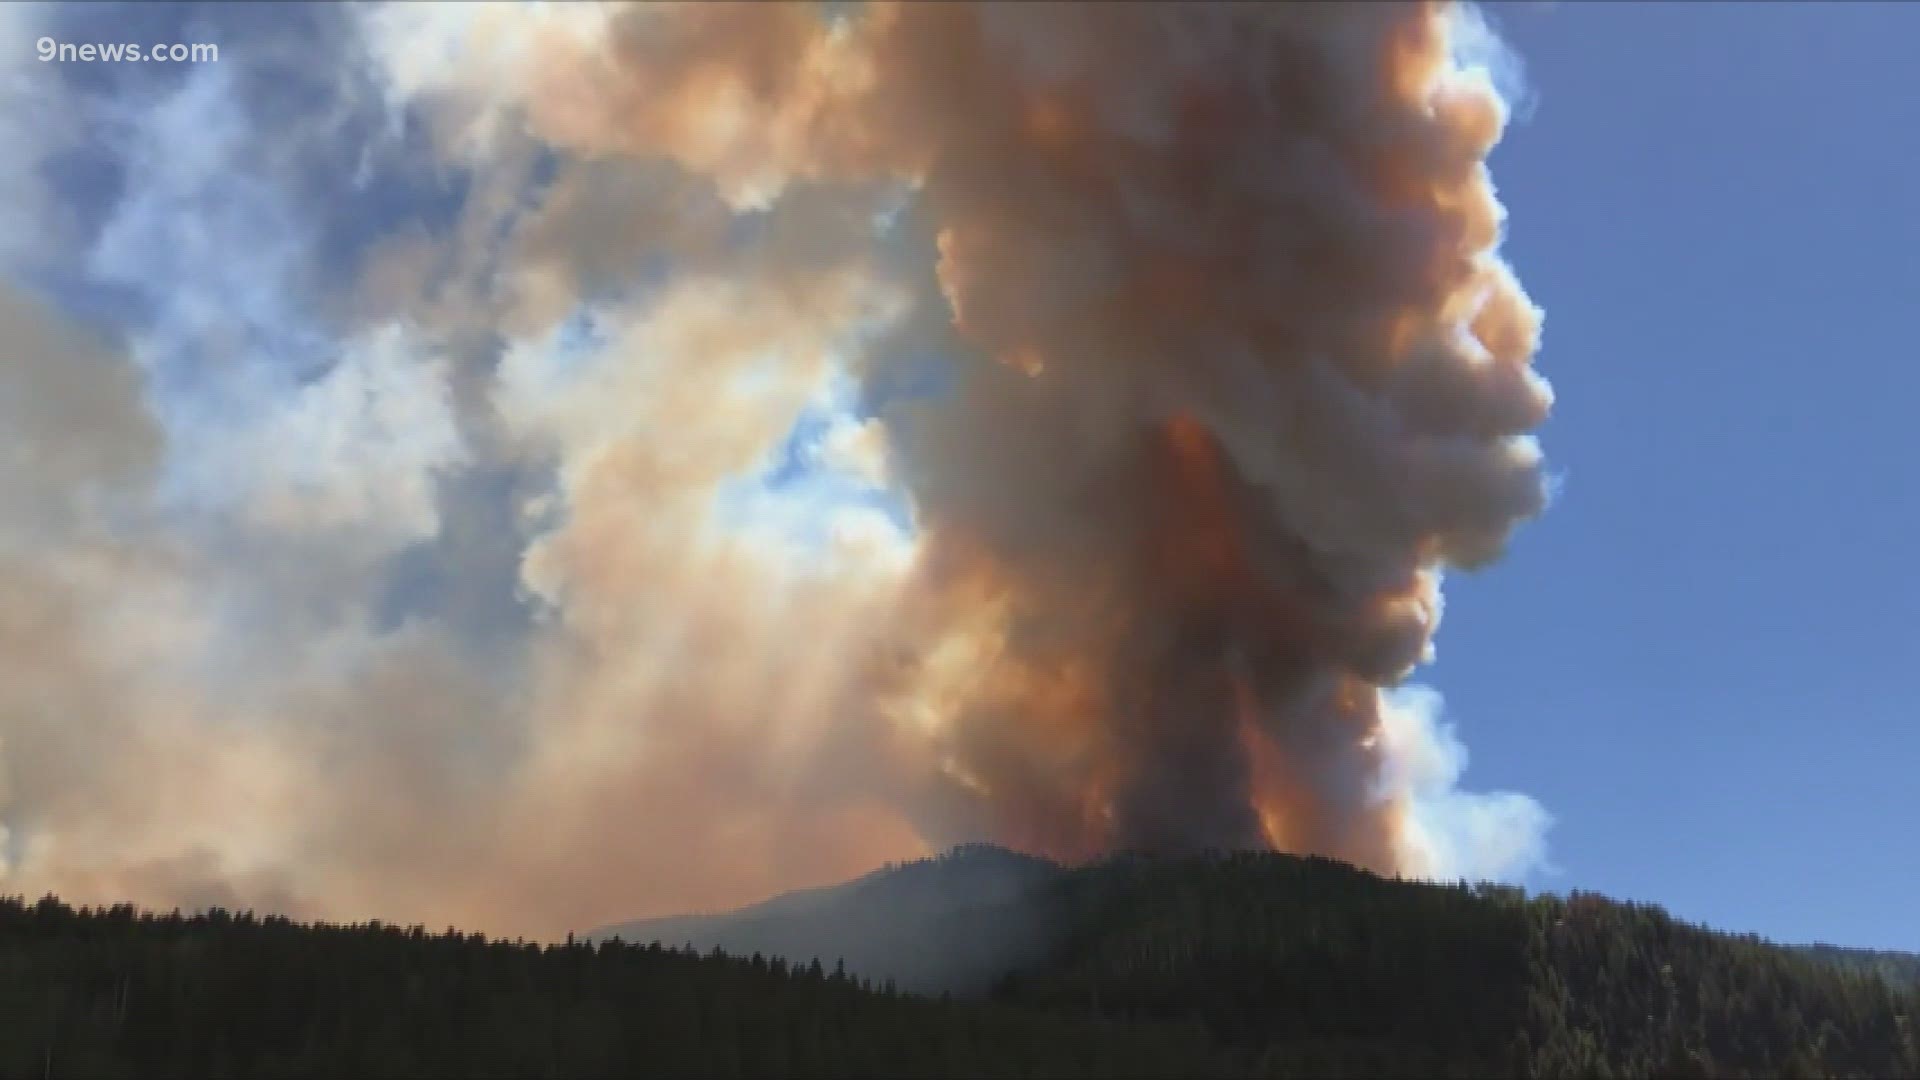 Among the largest wildfires burning now in Colorado are the Sylvan Fire, Muddy Slide Fire and Oil Springs Fire.